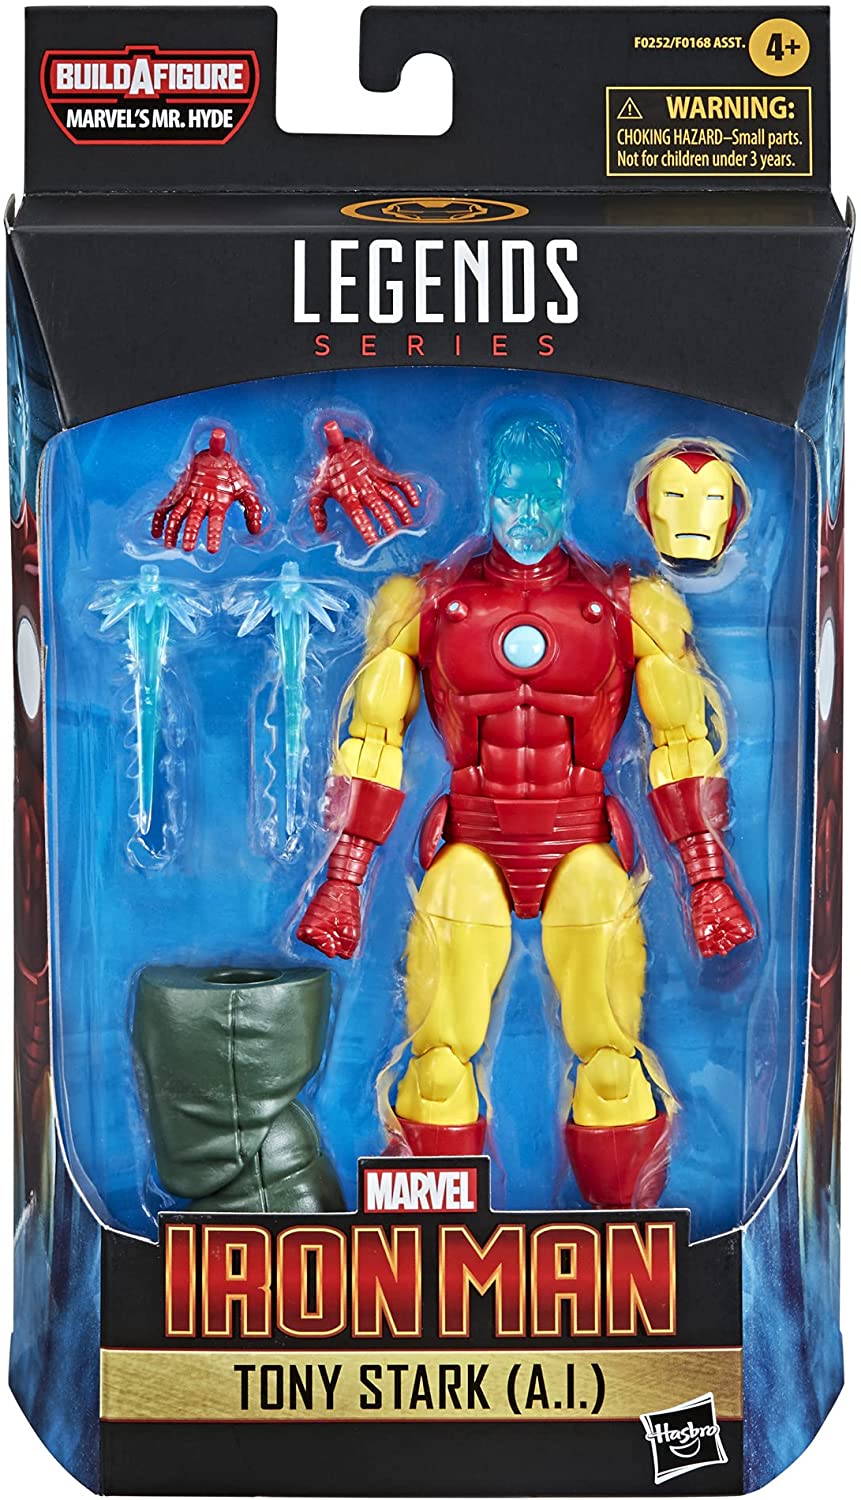 Hasbro Marvel Legends Series 15-cm Collectible Tony Stark (A.I.) Action Figure Toy for Ages 4 and Up F0252